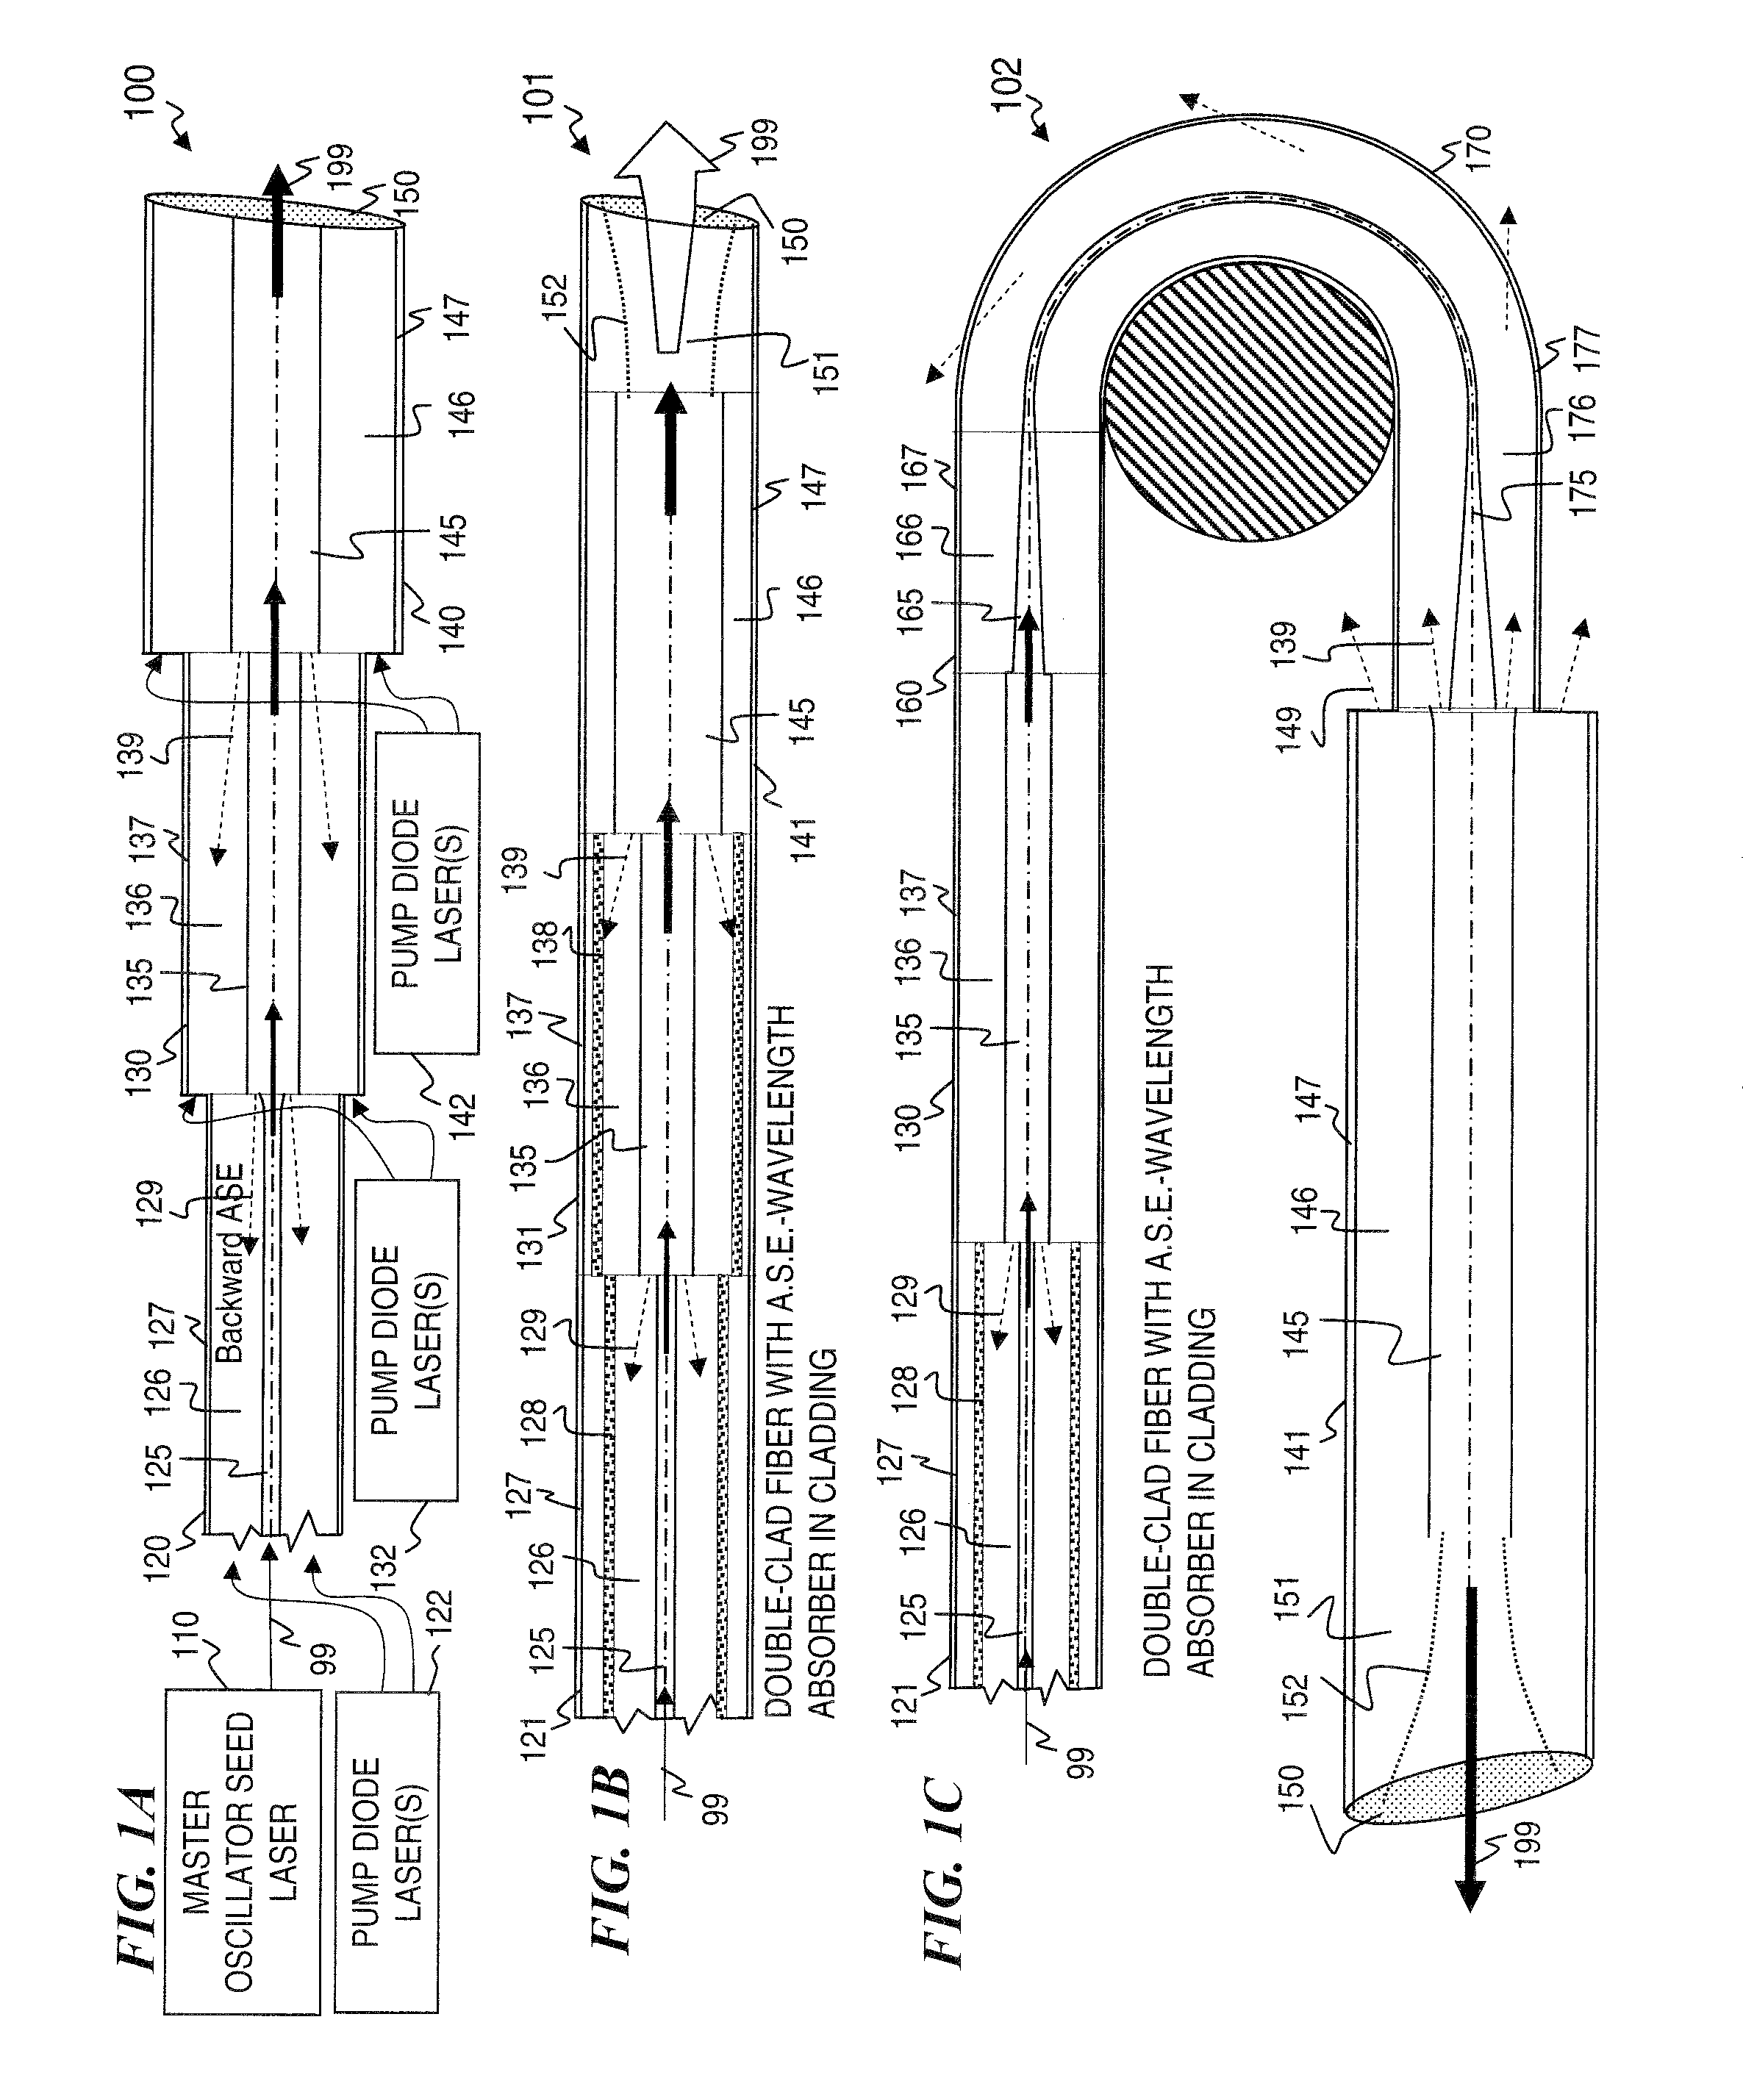 Method and apparatus for optical gain fiber having segments of differing core sizes